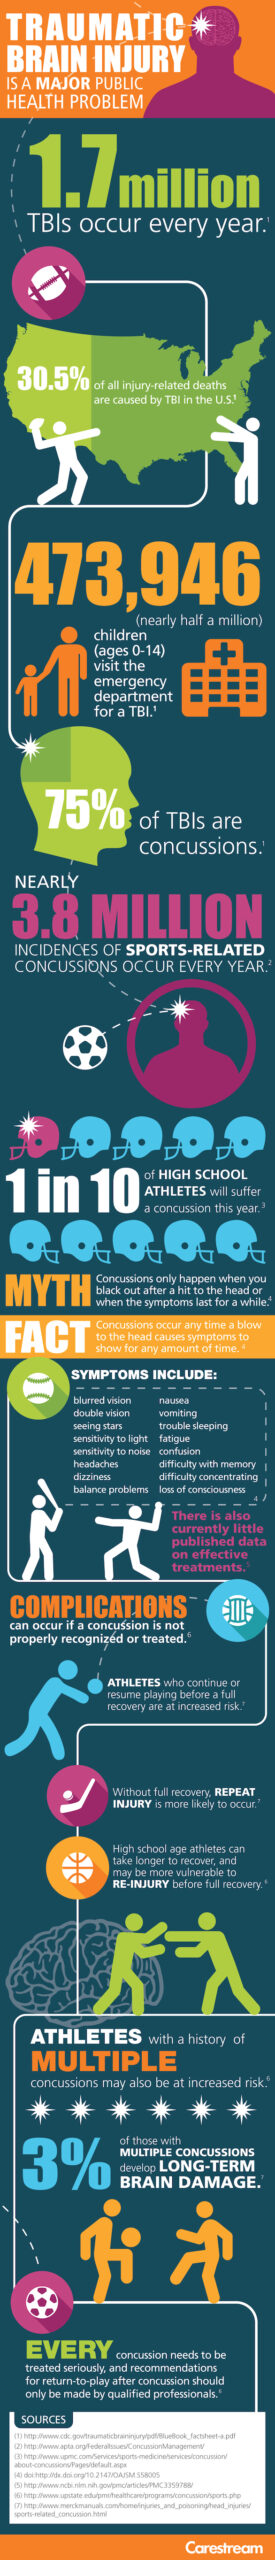  Traumatic Brain Injuries Are a Major Public Health Problem [INFOGRAPHIC]